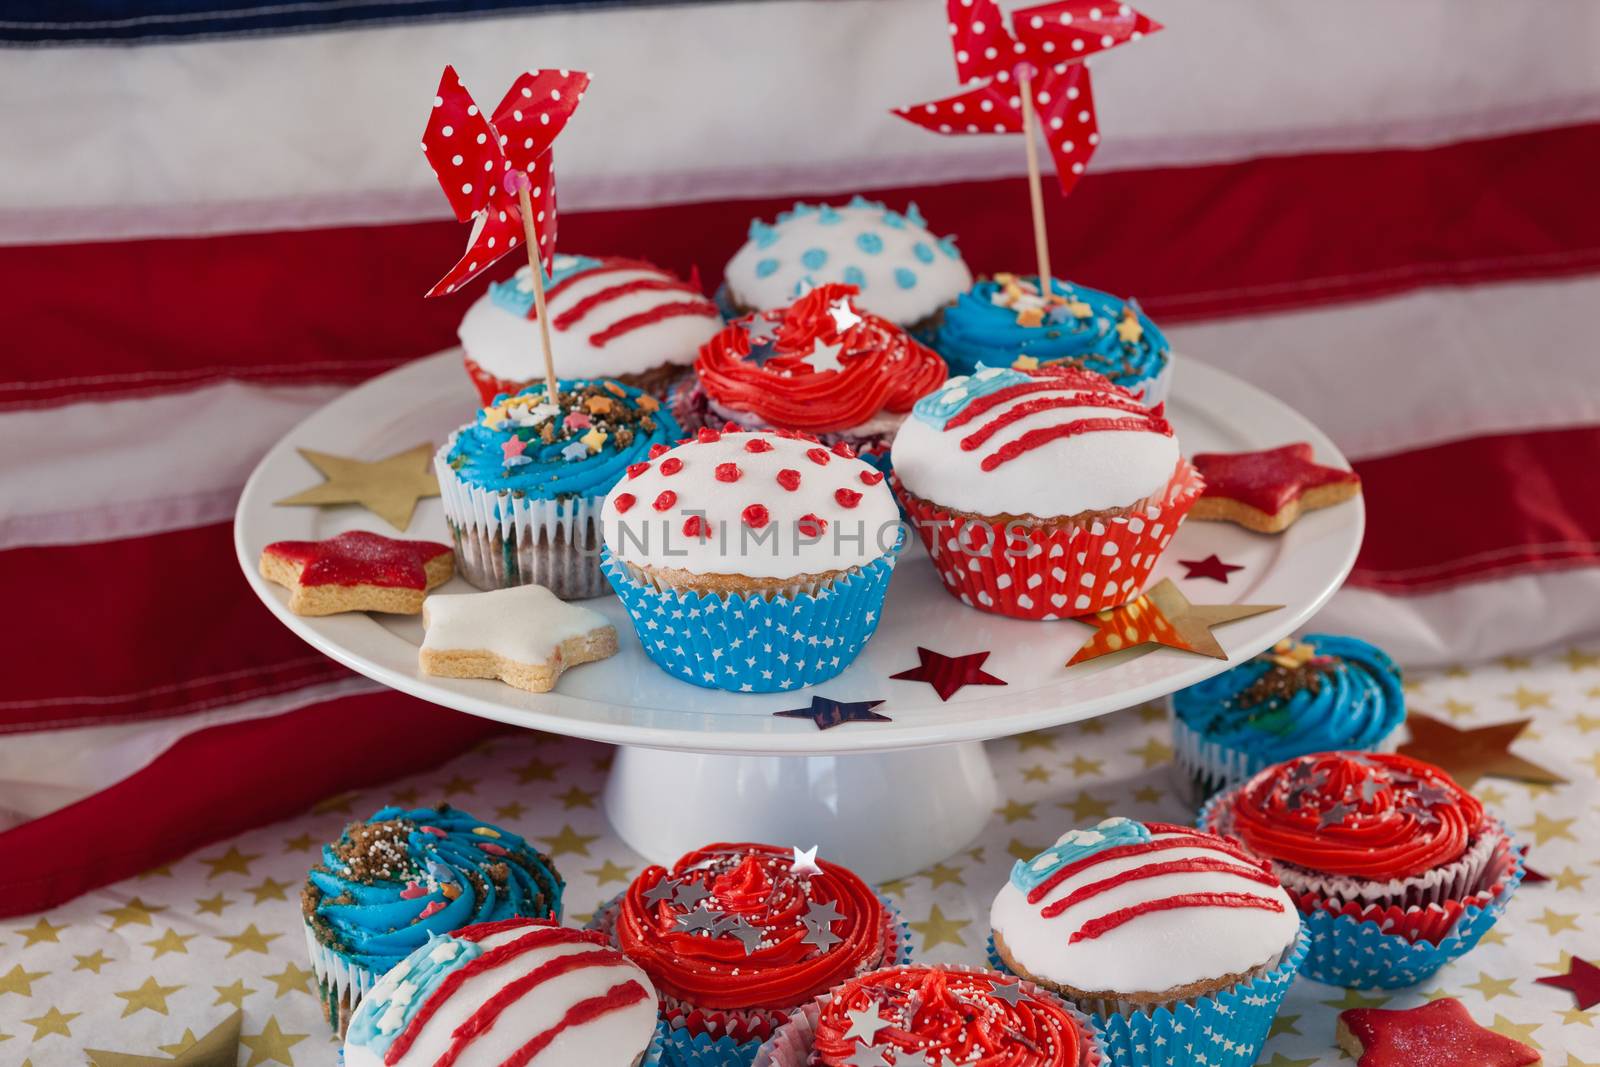 Close-up of decorated cupcakes by Wavebreakmedia